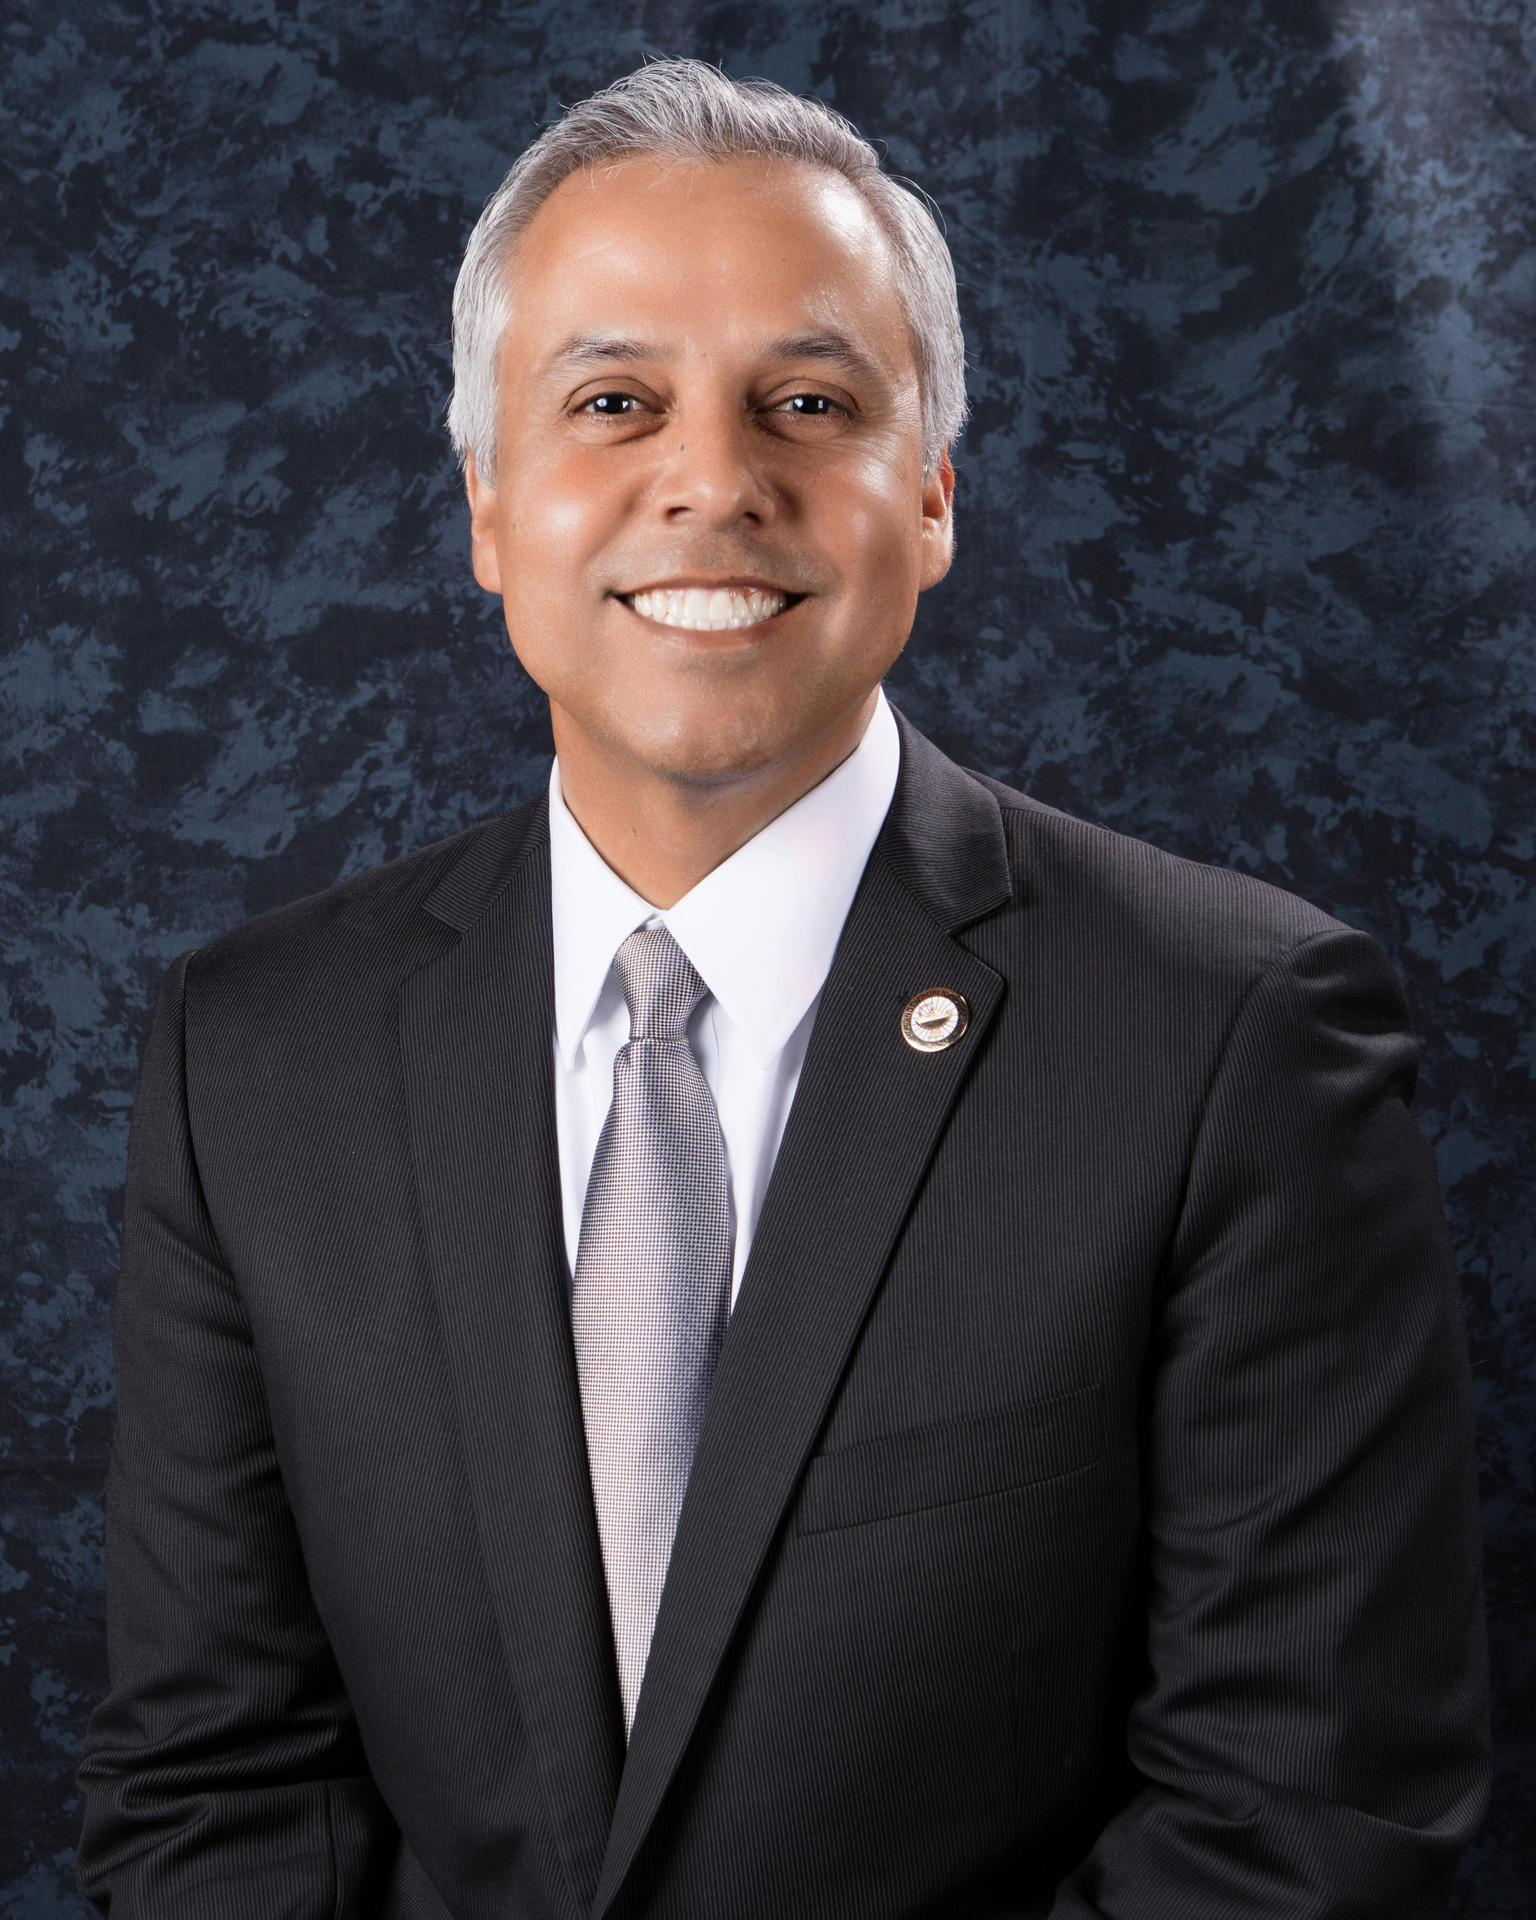 HCISD superintendent appointed as chairman of State Board for Educator Certification